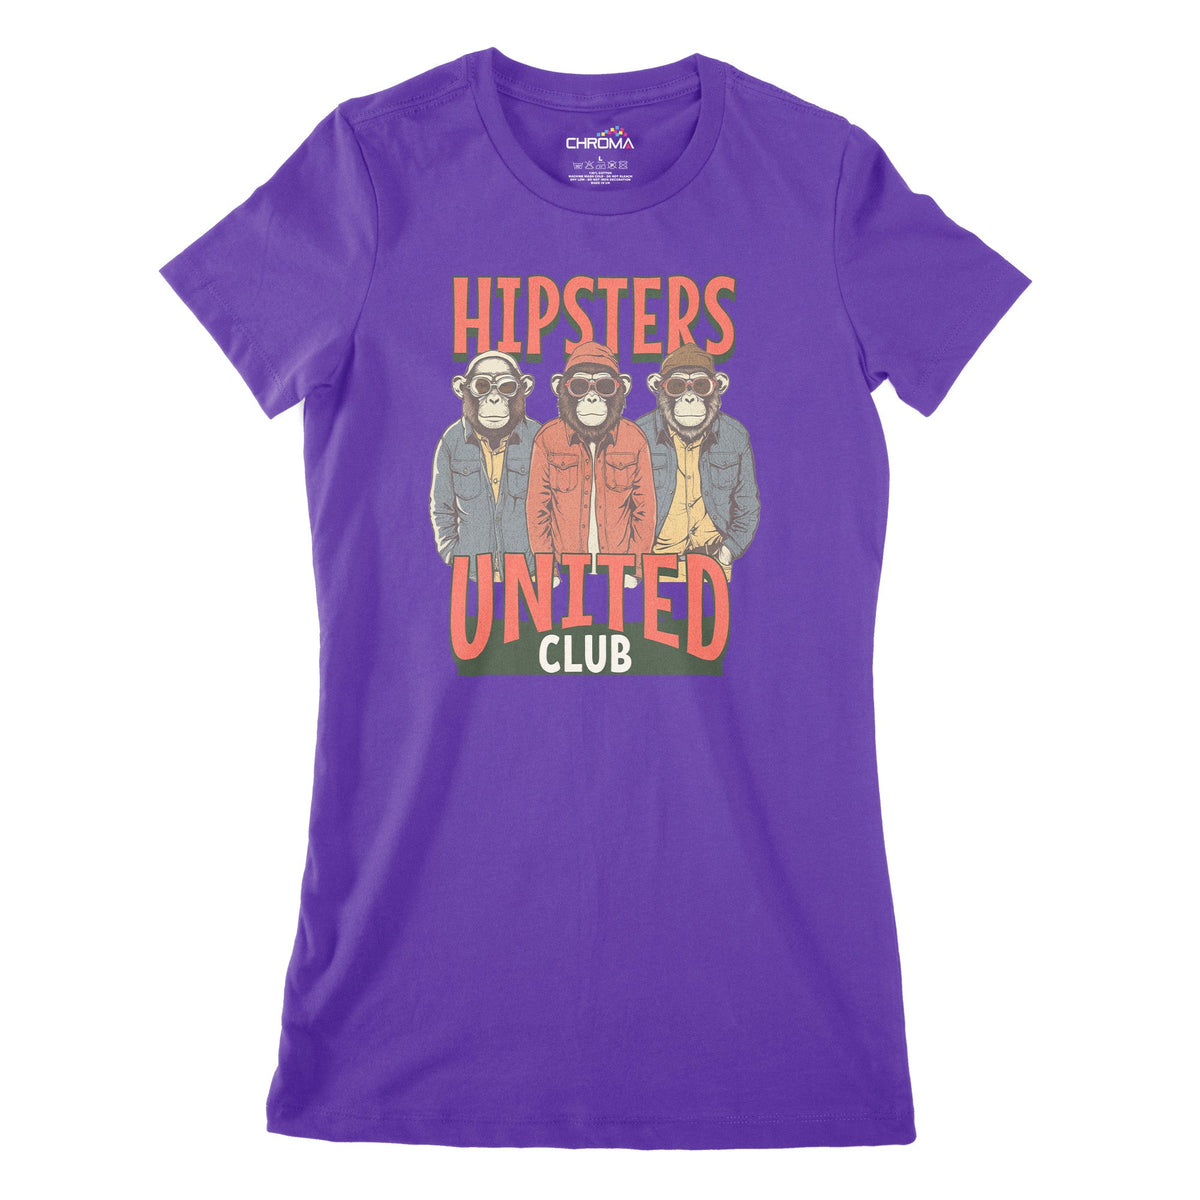 Hipsters United Club Women's Classic Fitted T-Shirt Chroma Clothing